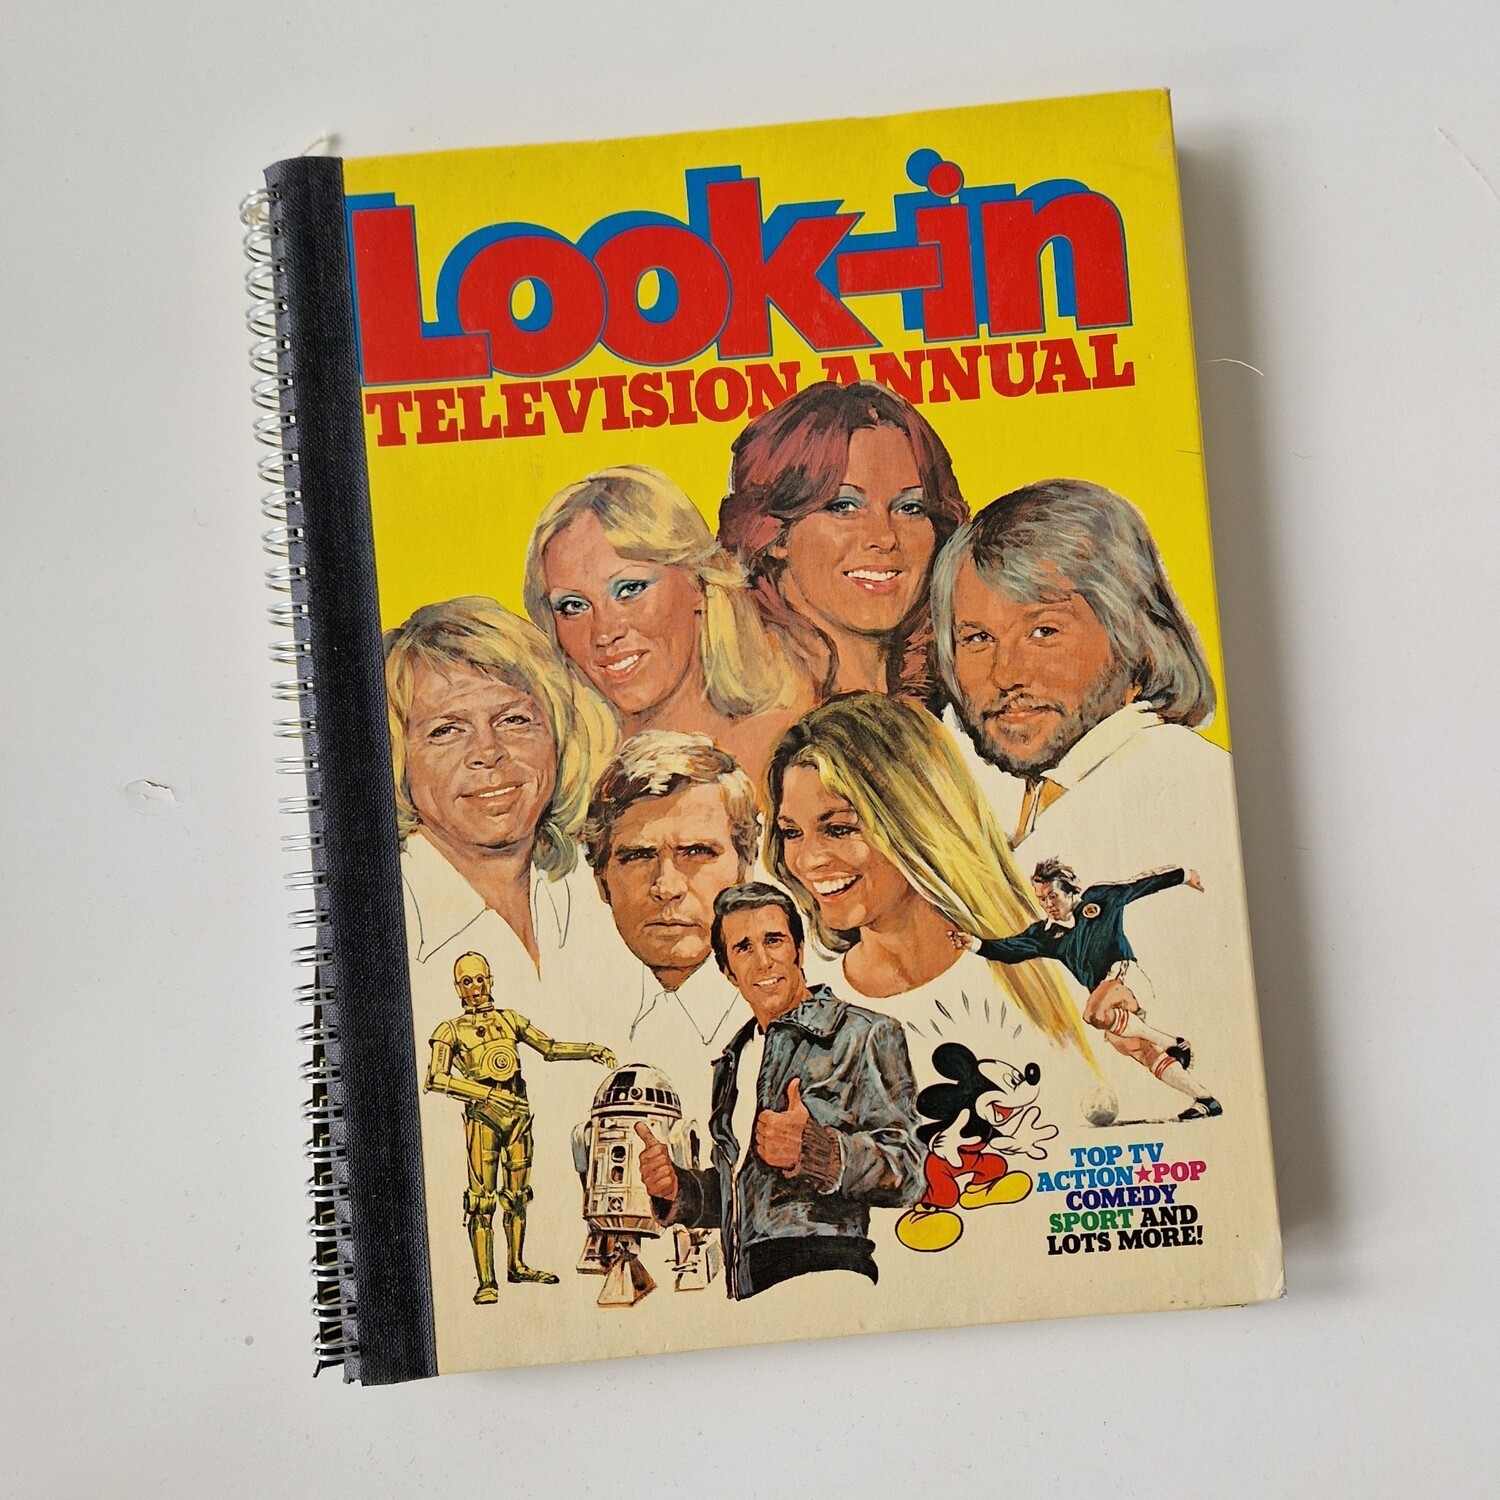 Look-In TV Annual, Abba, Star Wars, Happy Days - no original book pages, 1970s